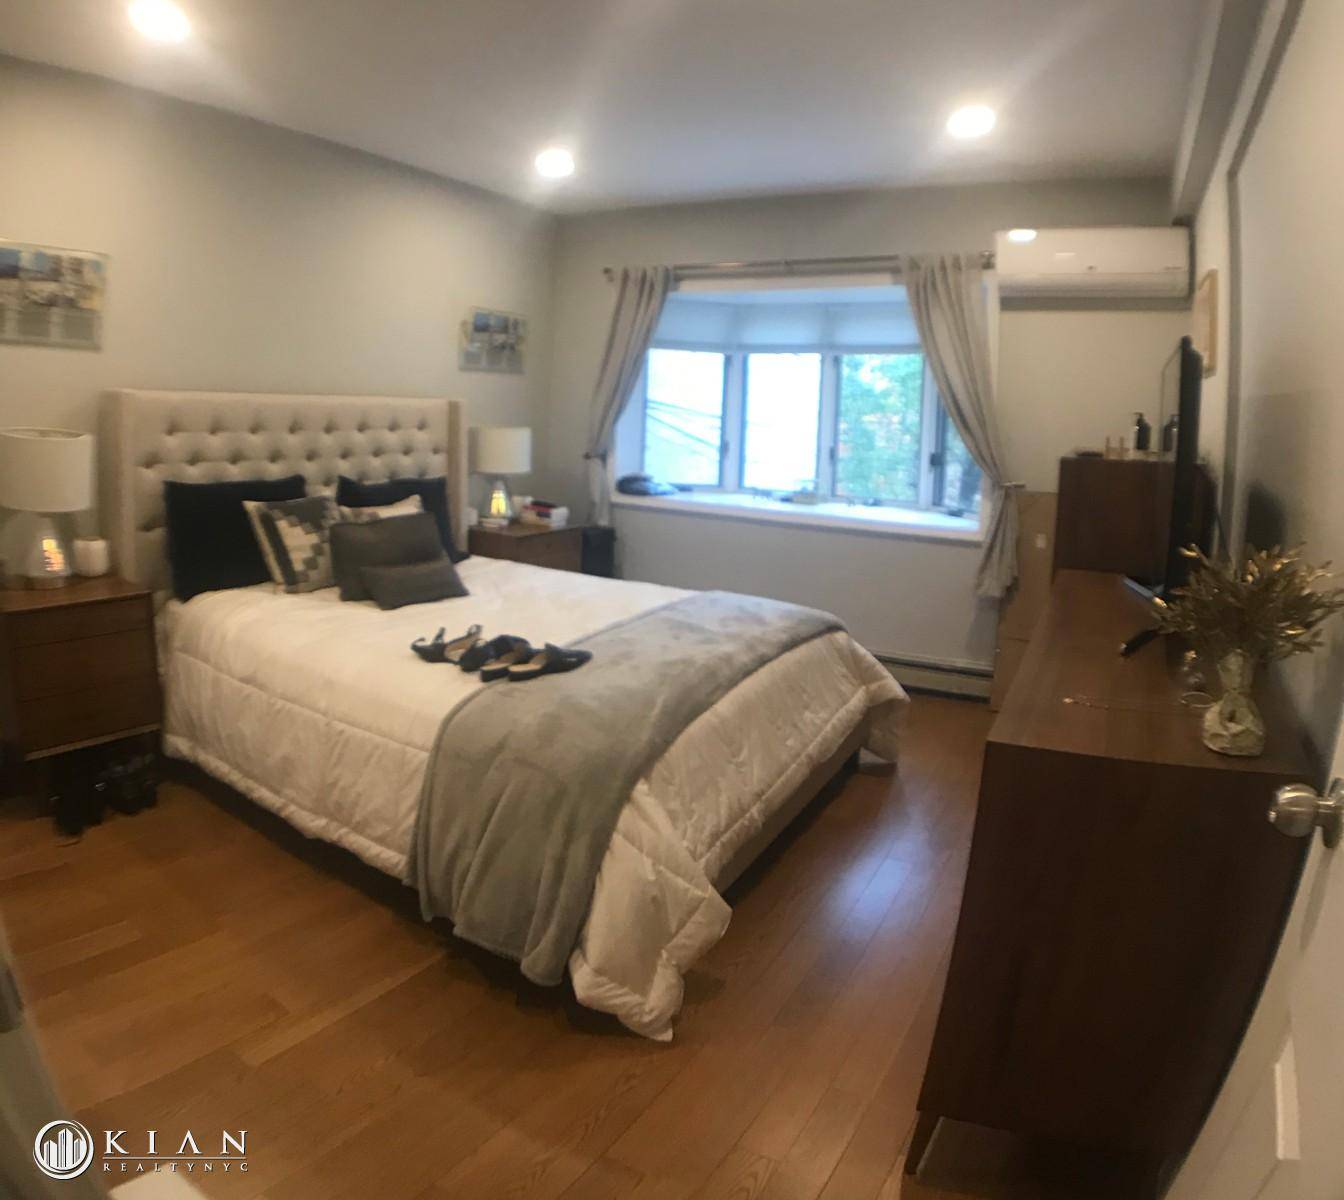 Large one bedroom for rent in Prime Hunters Point Long Island City.